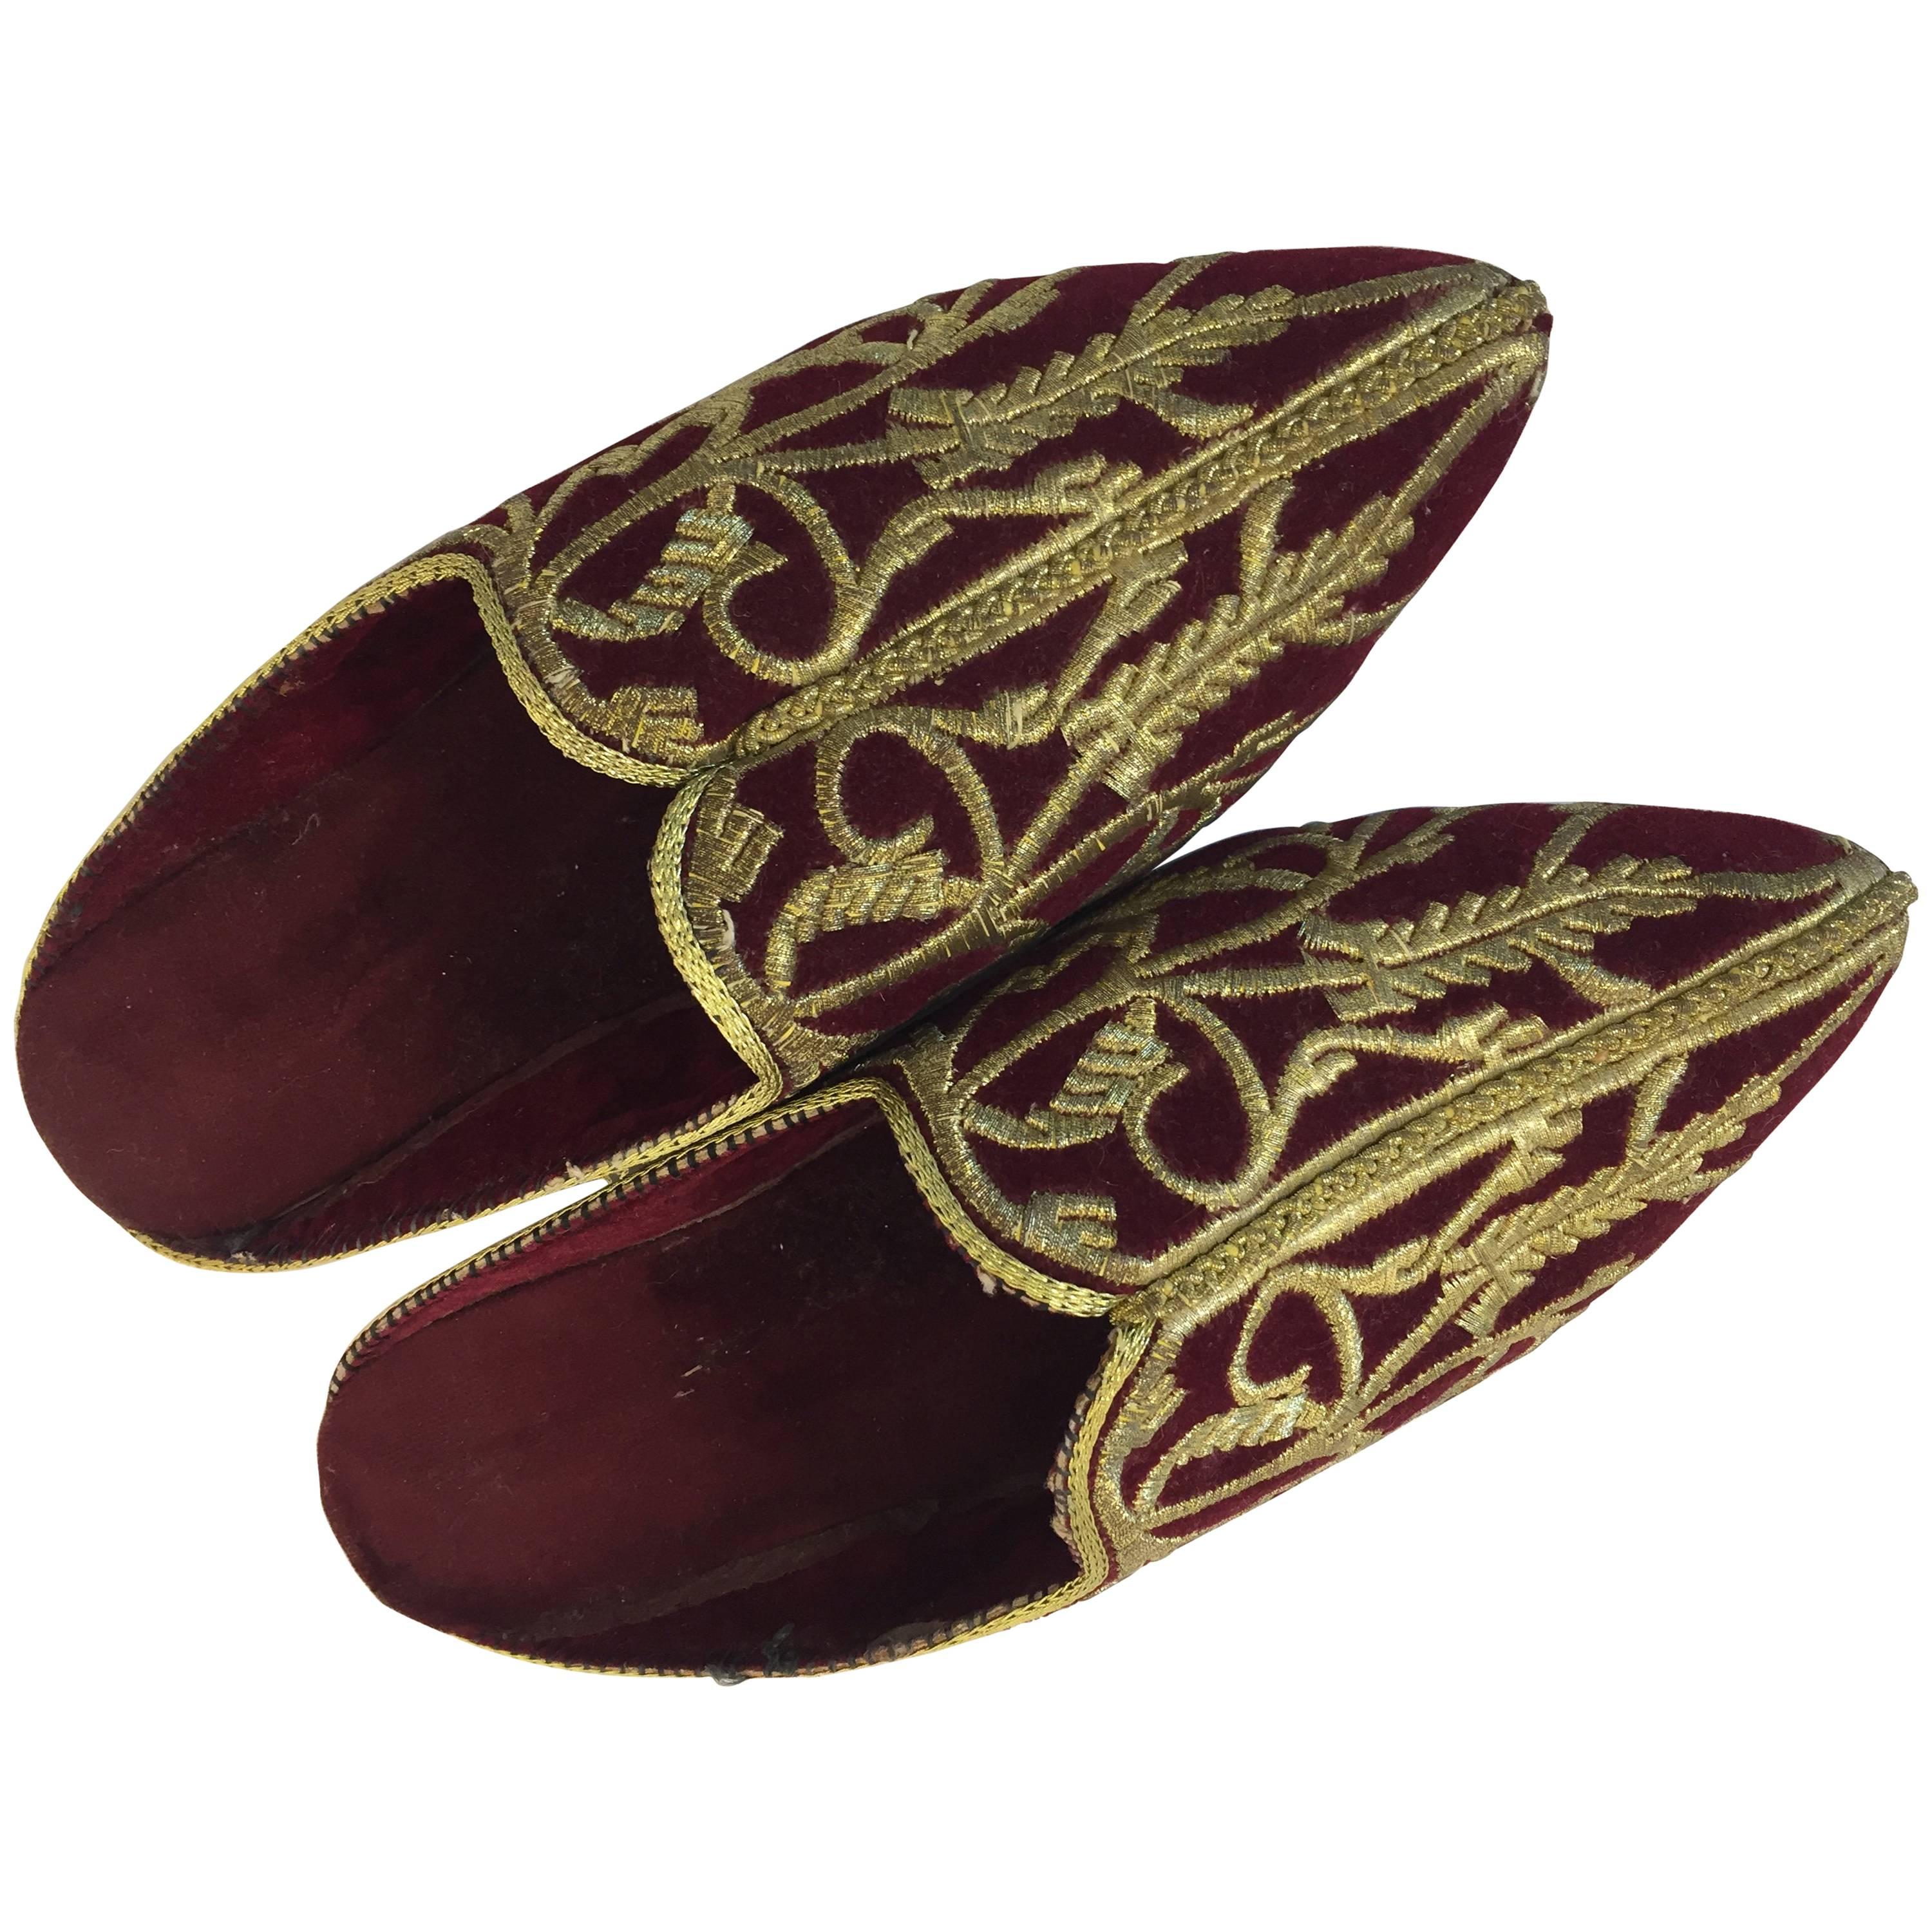 Turkish Velvet Embroidered with Gold Metallic Thread Slippers Shoes For Sale